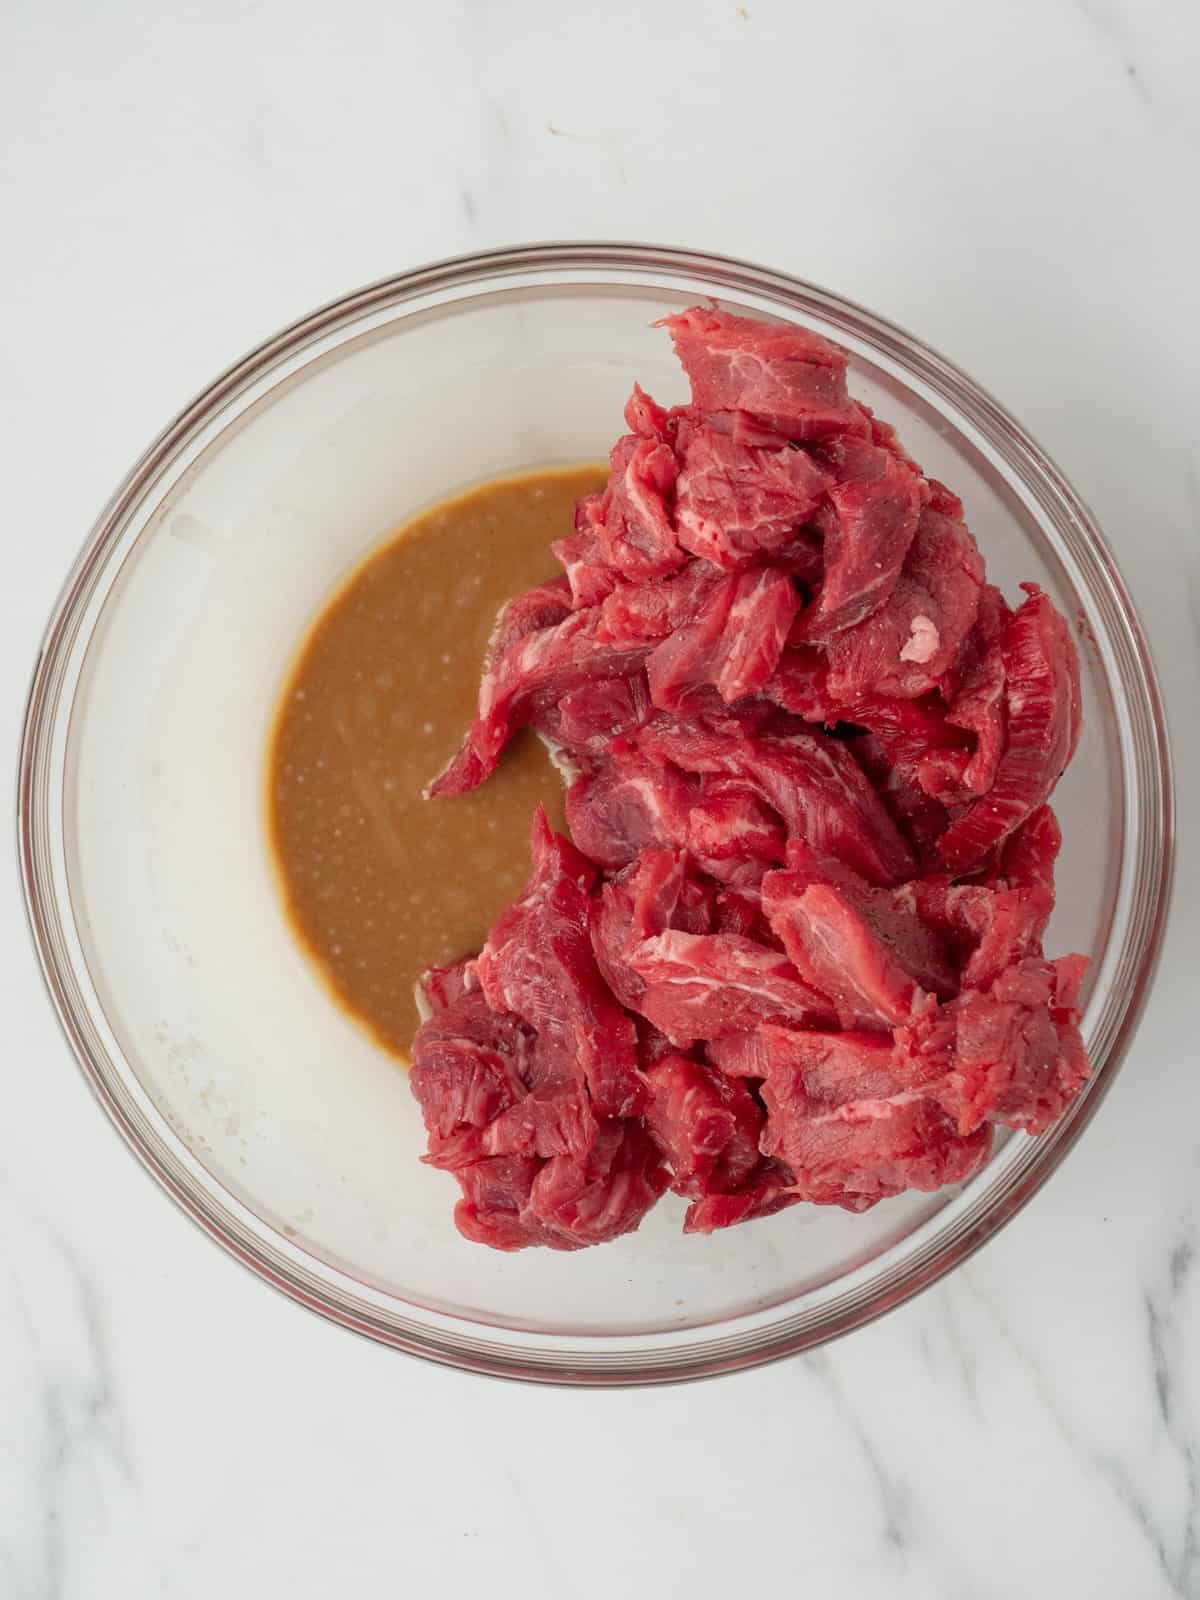 A glass mixing bowl with the steak strips and the soy sauce mixture, in order to coat the steak strips with the mixture.